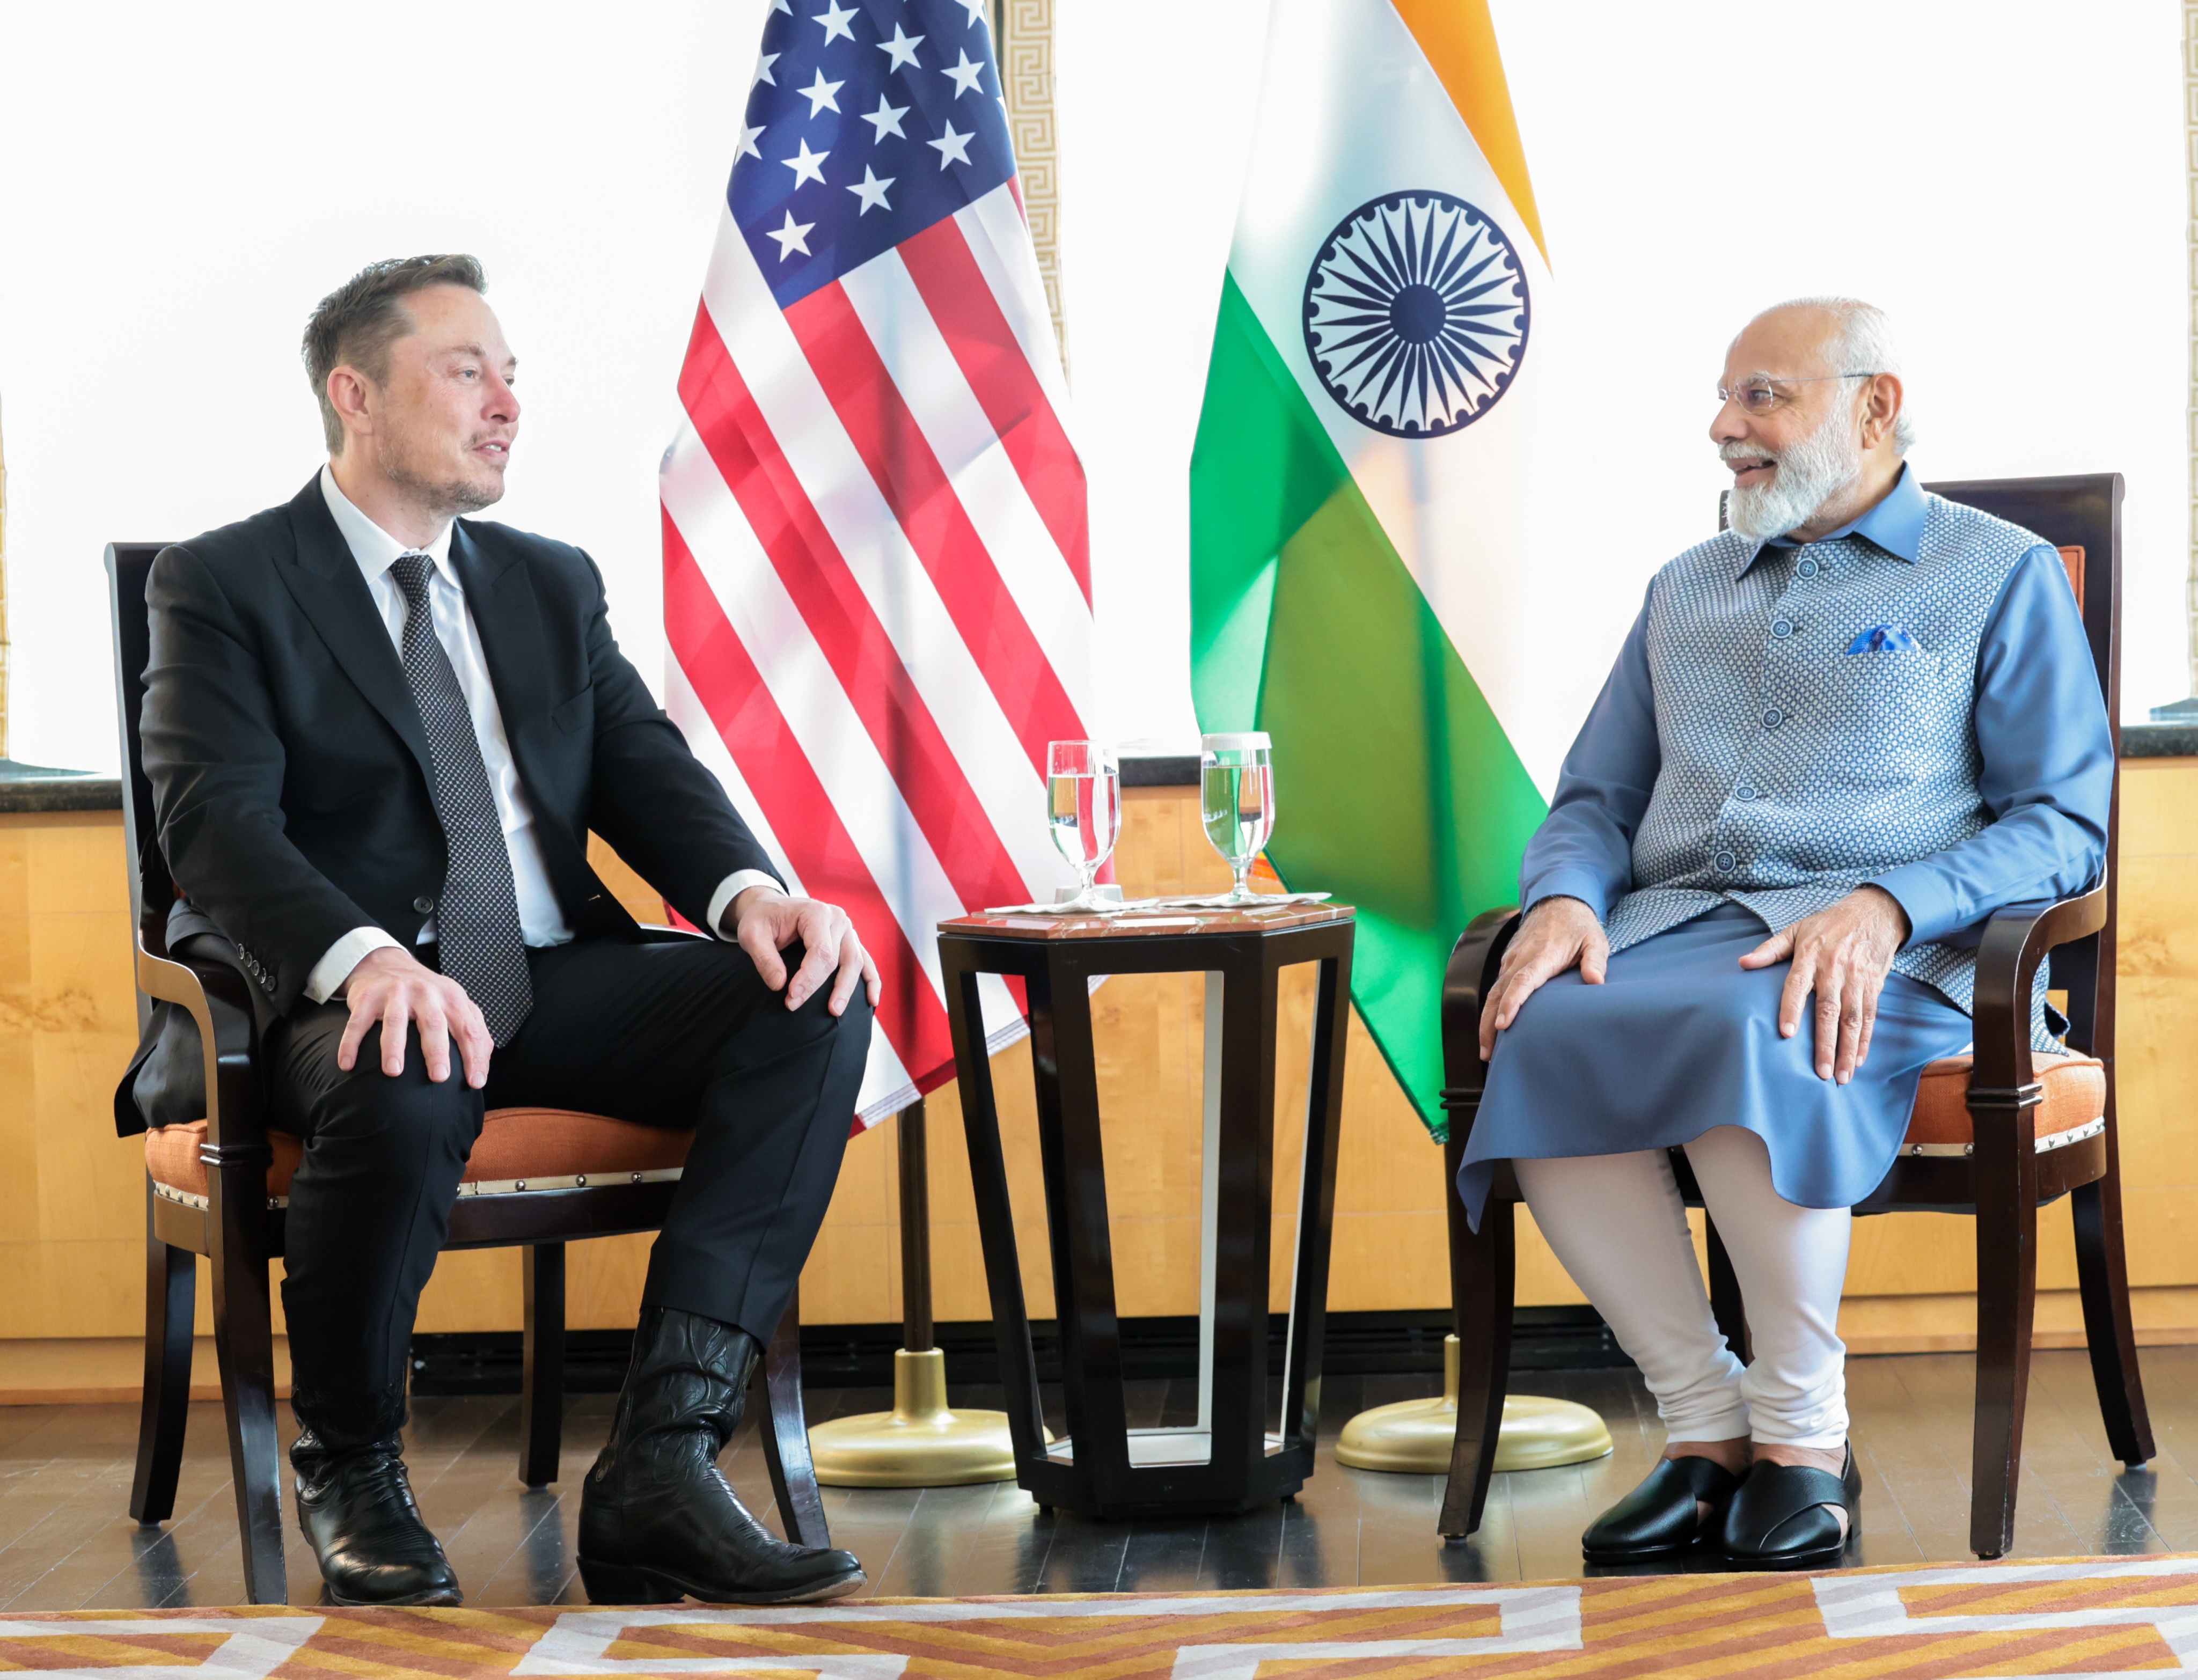 Narendra Modi on X: "Great meeting you today @elonmusk! We had multifaceted conversations on issues ranging from energy to spirituality. https://t.co/IVwOy5SlMV" / X